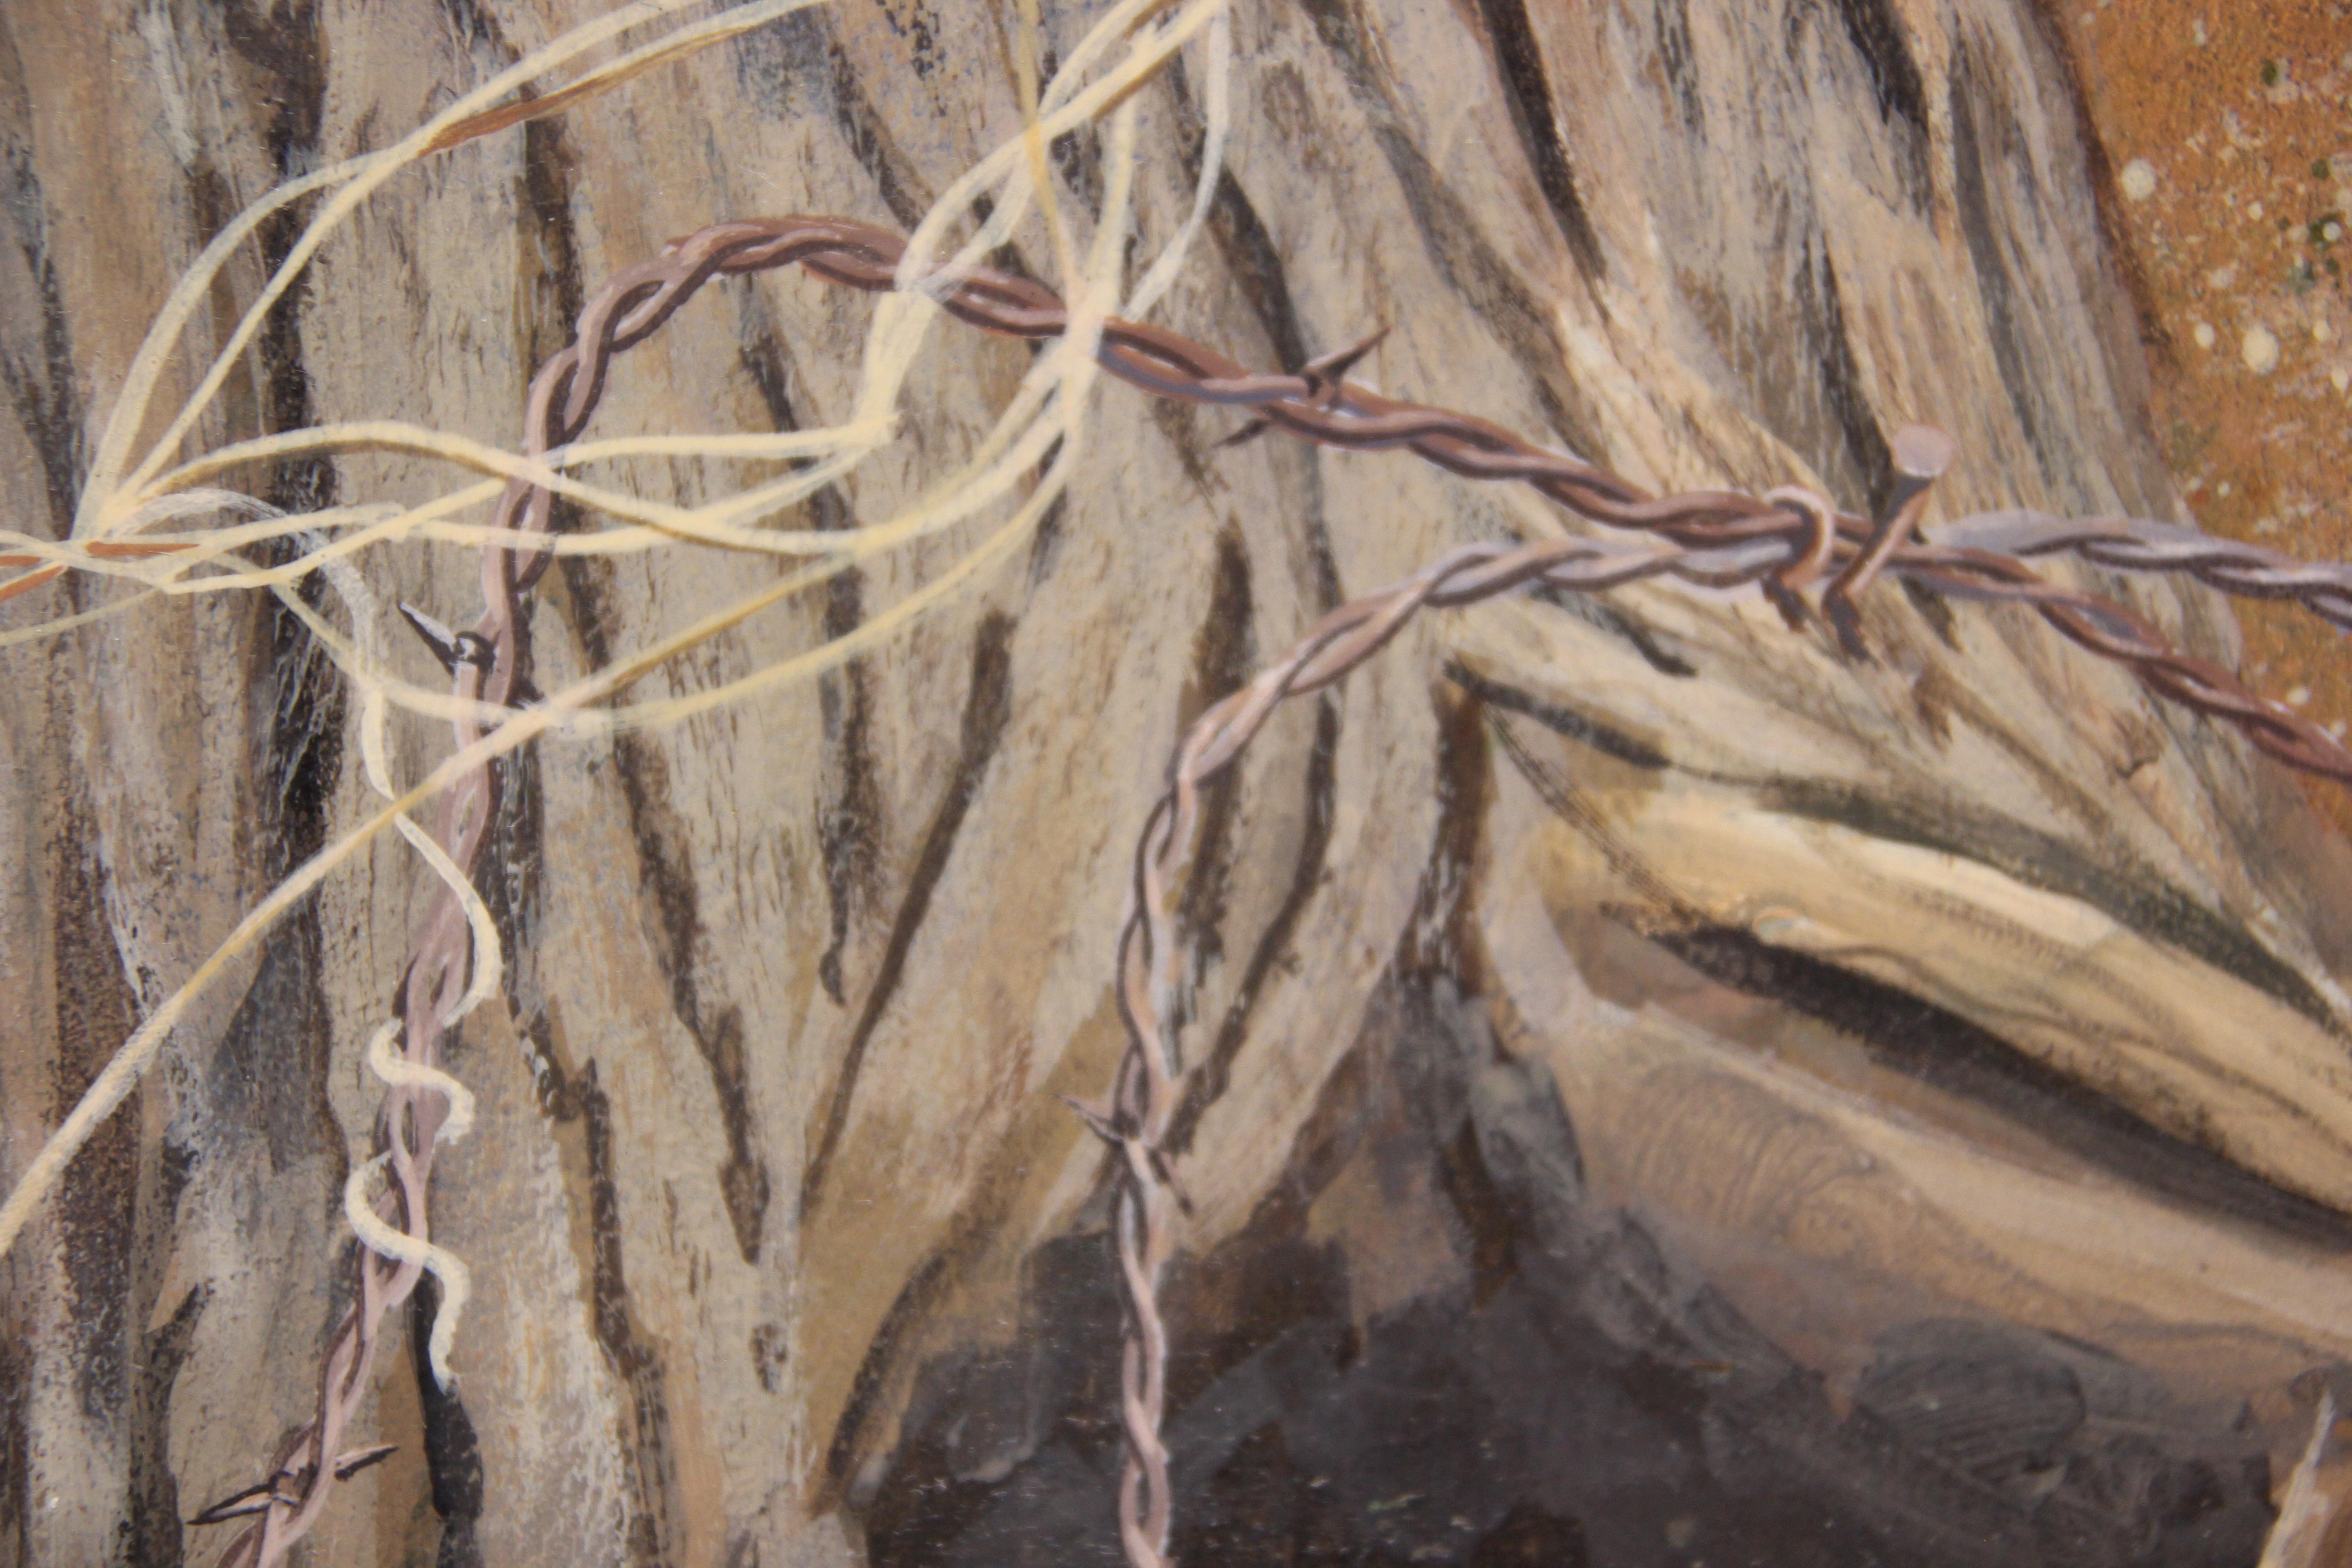 Modern realist still life painting of an old tree stump wrapped in barbed wire with yellow native flowers growing around it. Painted by Texas modernist painter Boyd Graham from the 1970s-1980s. Signed along the lower border. Currently hung in a